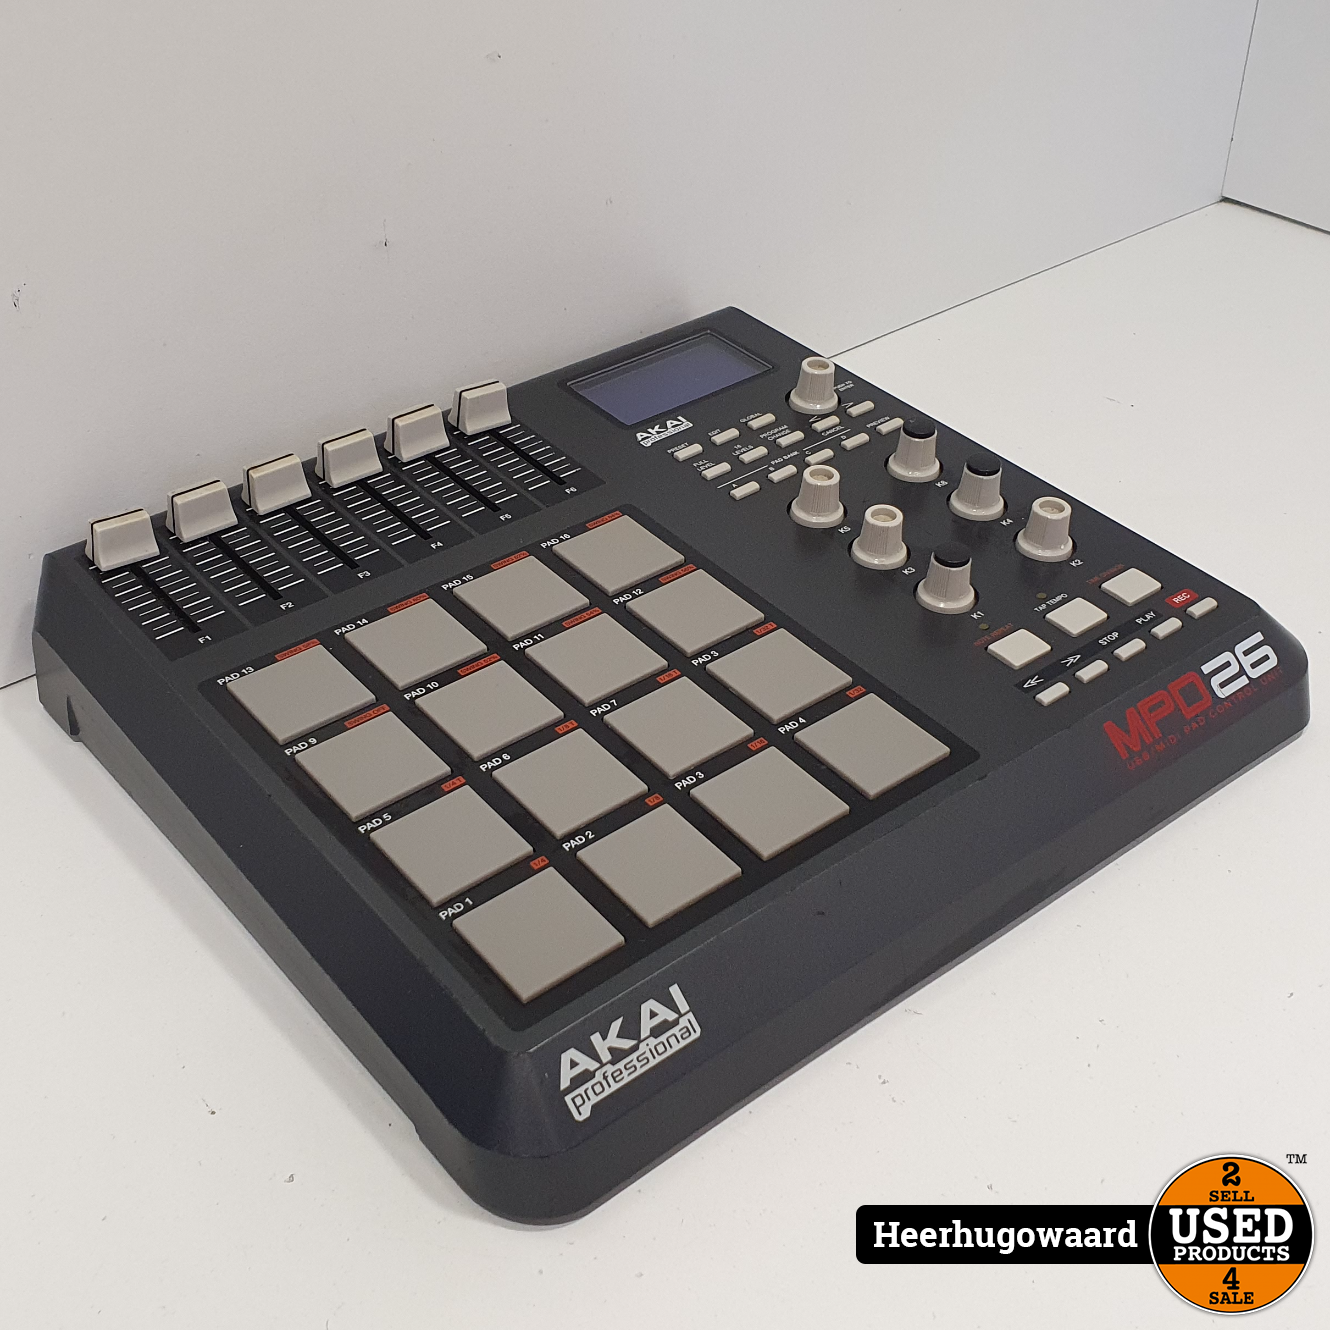 Akai MPD26 Midi Nette Staat - Used Products